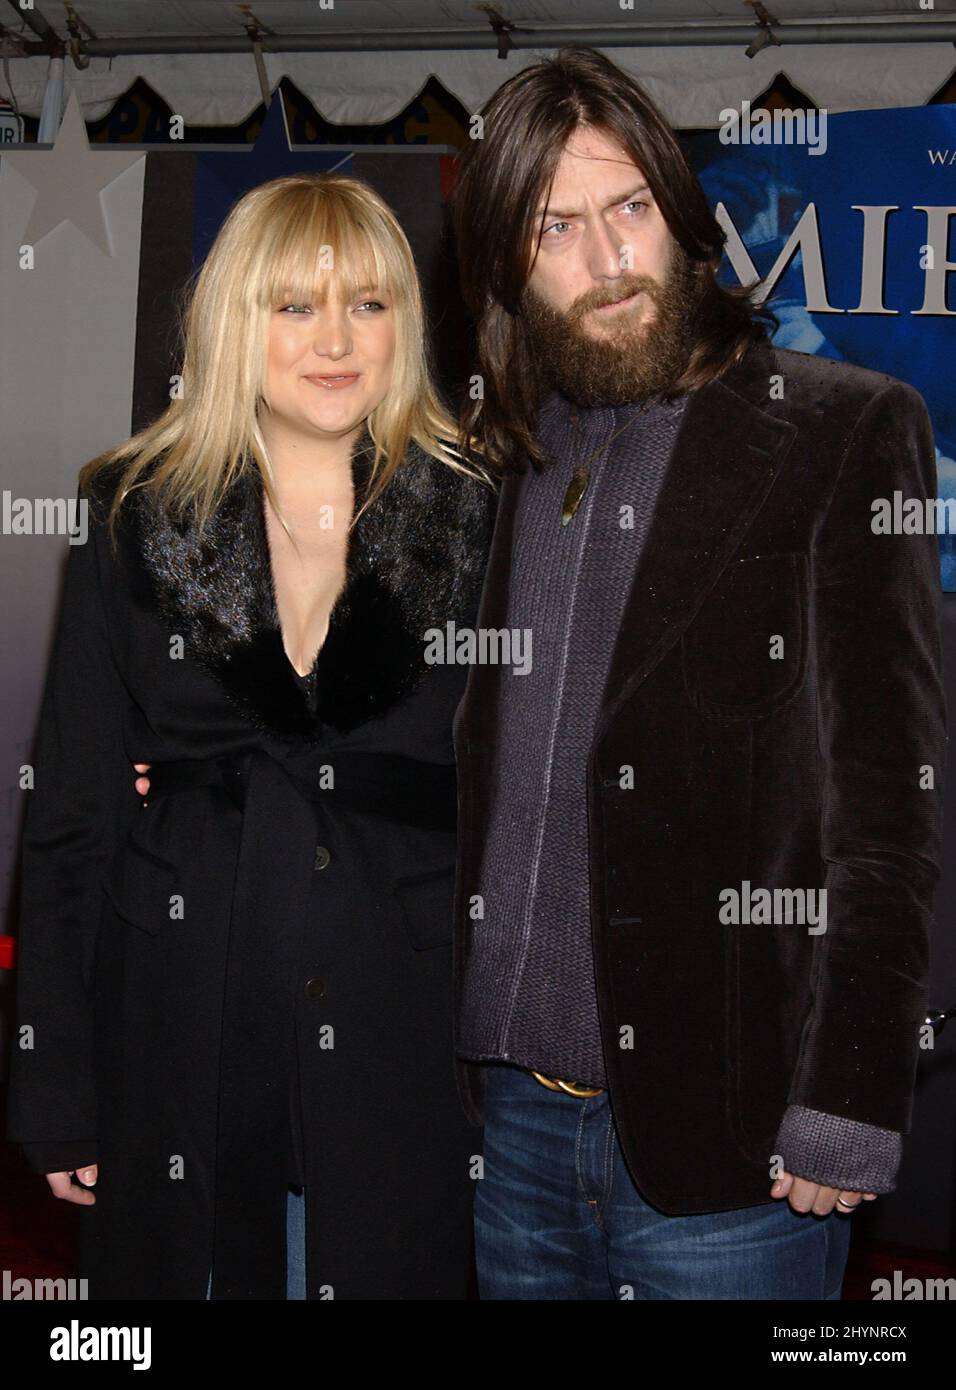 KATE HUDSON & CHRIS ROBINSON ATTEND THE 'MIRACLE' WORLD FILM PREMIERE IN HOLLYWOOD. PICTURE: UK PRESS Stock Photo